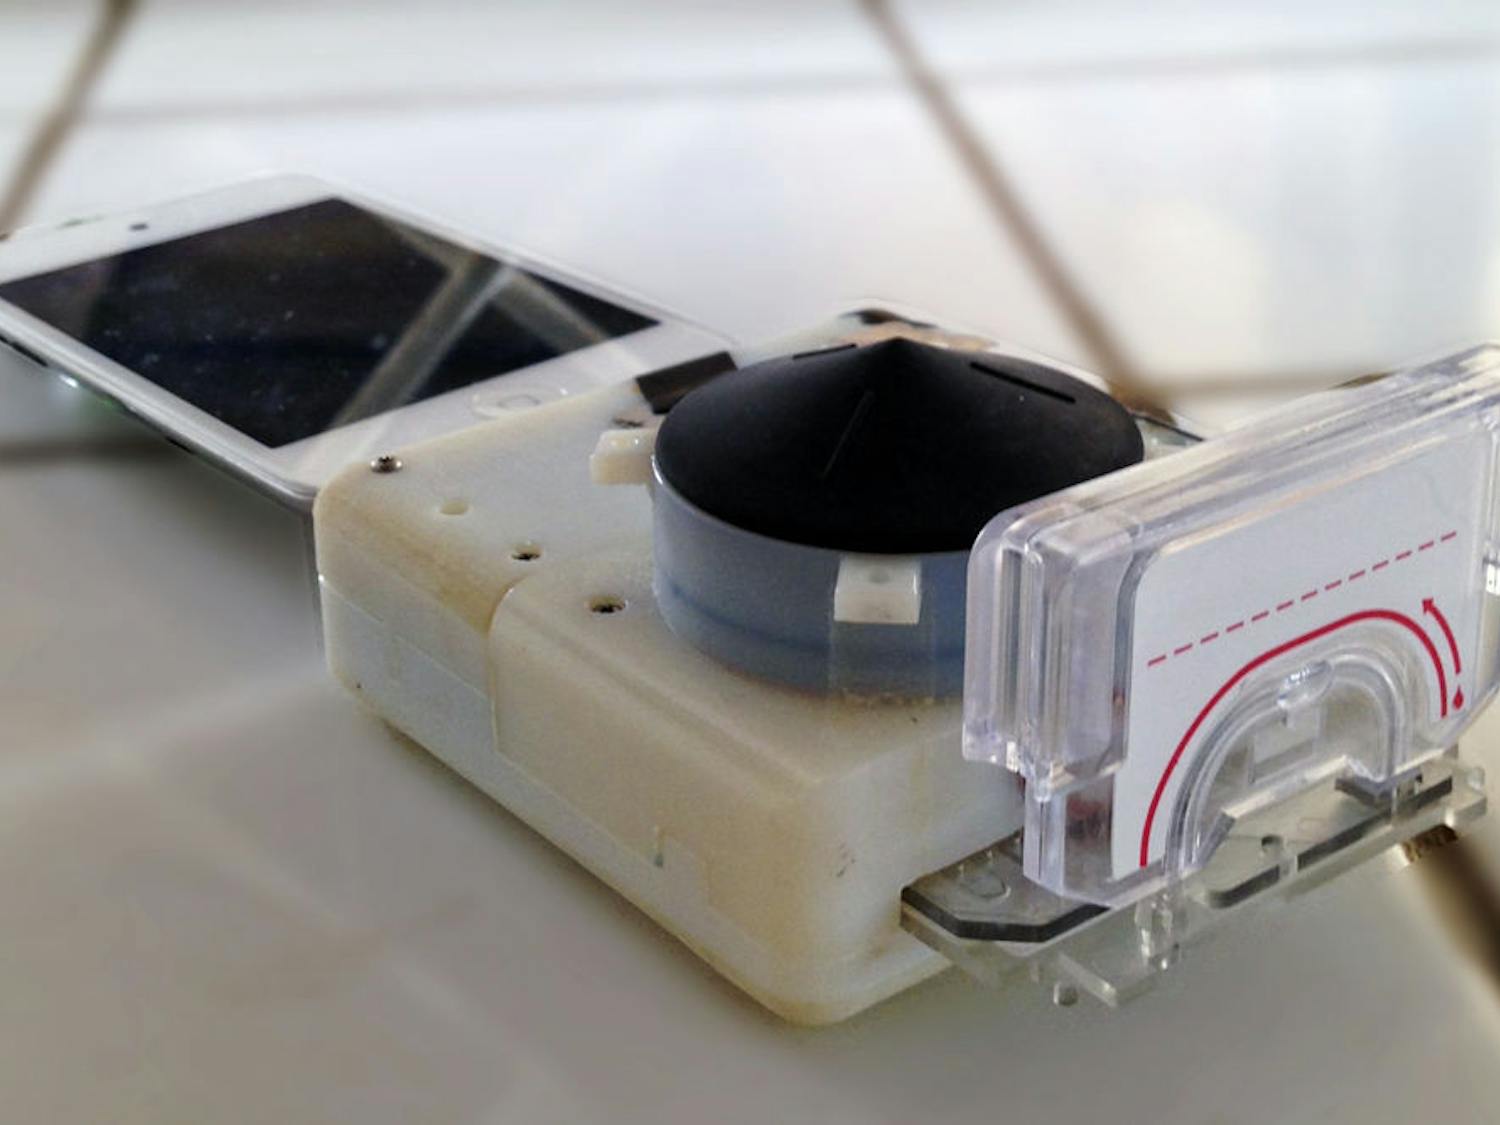 Pictured is one of the smartphone dongles that can test for HIV and syphilis. Funded by the Saving Lives at Birth program through the U.S. Agency for International Development, the device costs $34 to make, plus $2 for each test cassette.